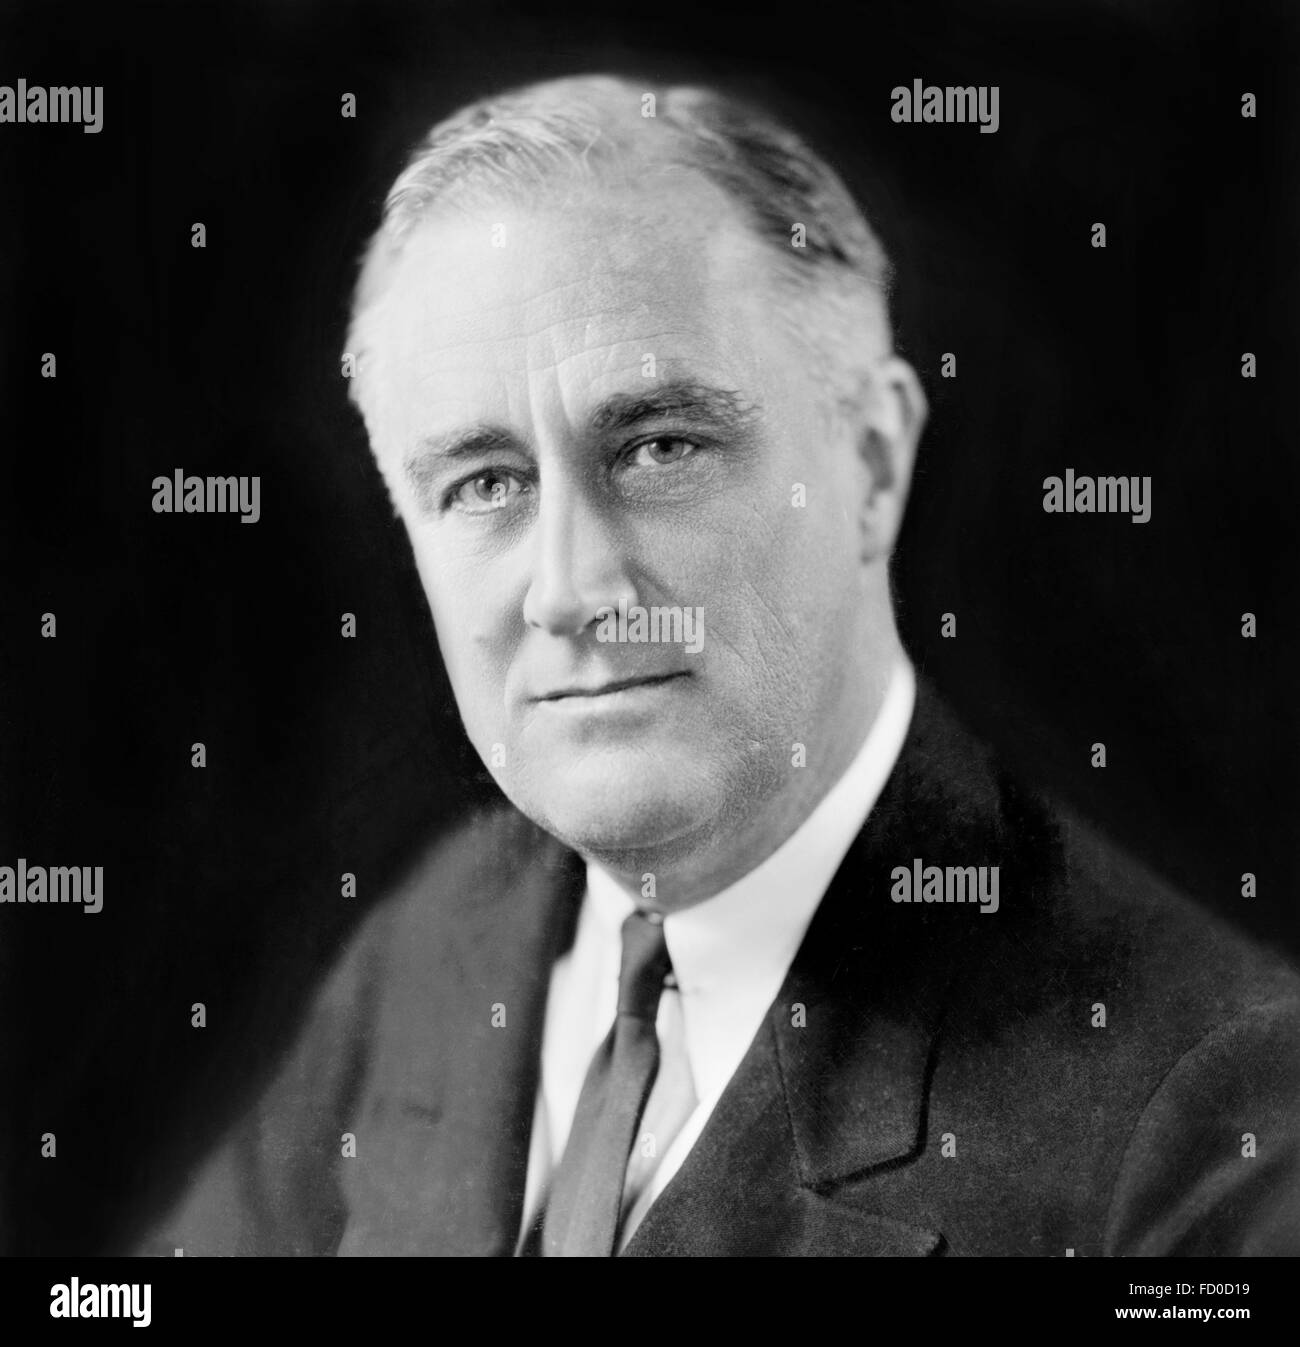 Franklin D Roosevelt, portrait of the 32nd President of the USA, c. Dec 1933 Stock Photo